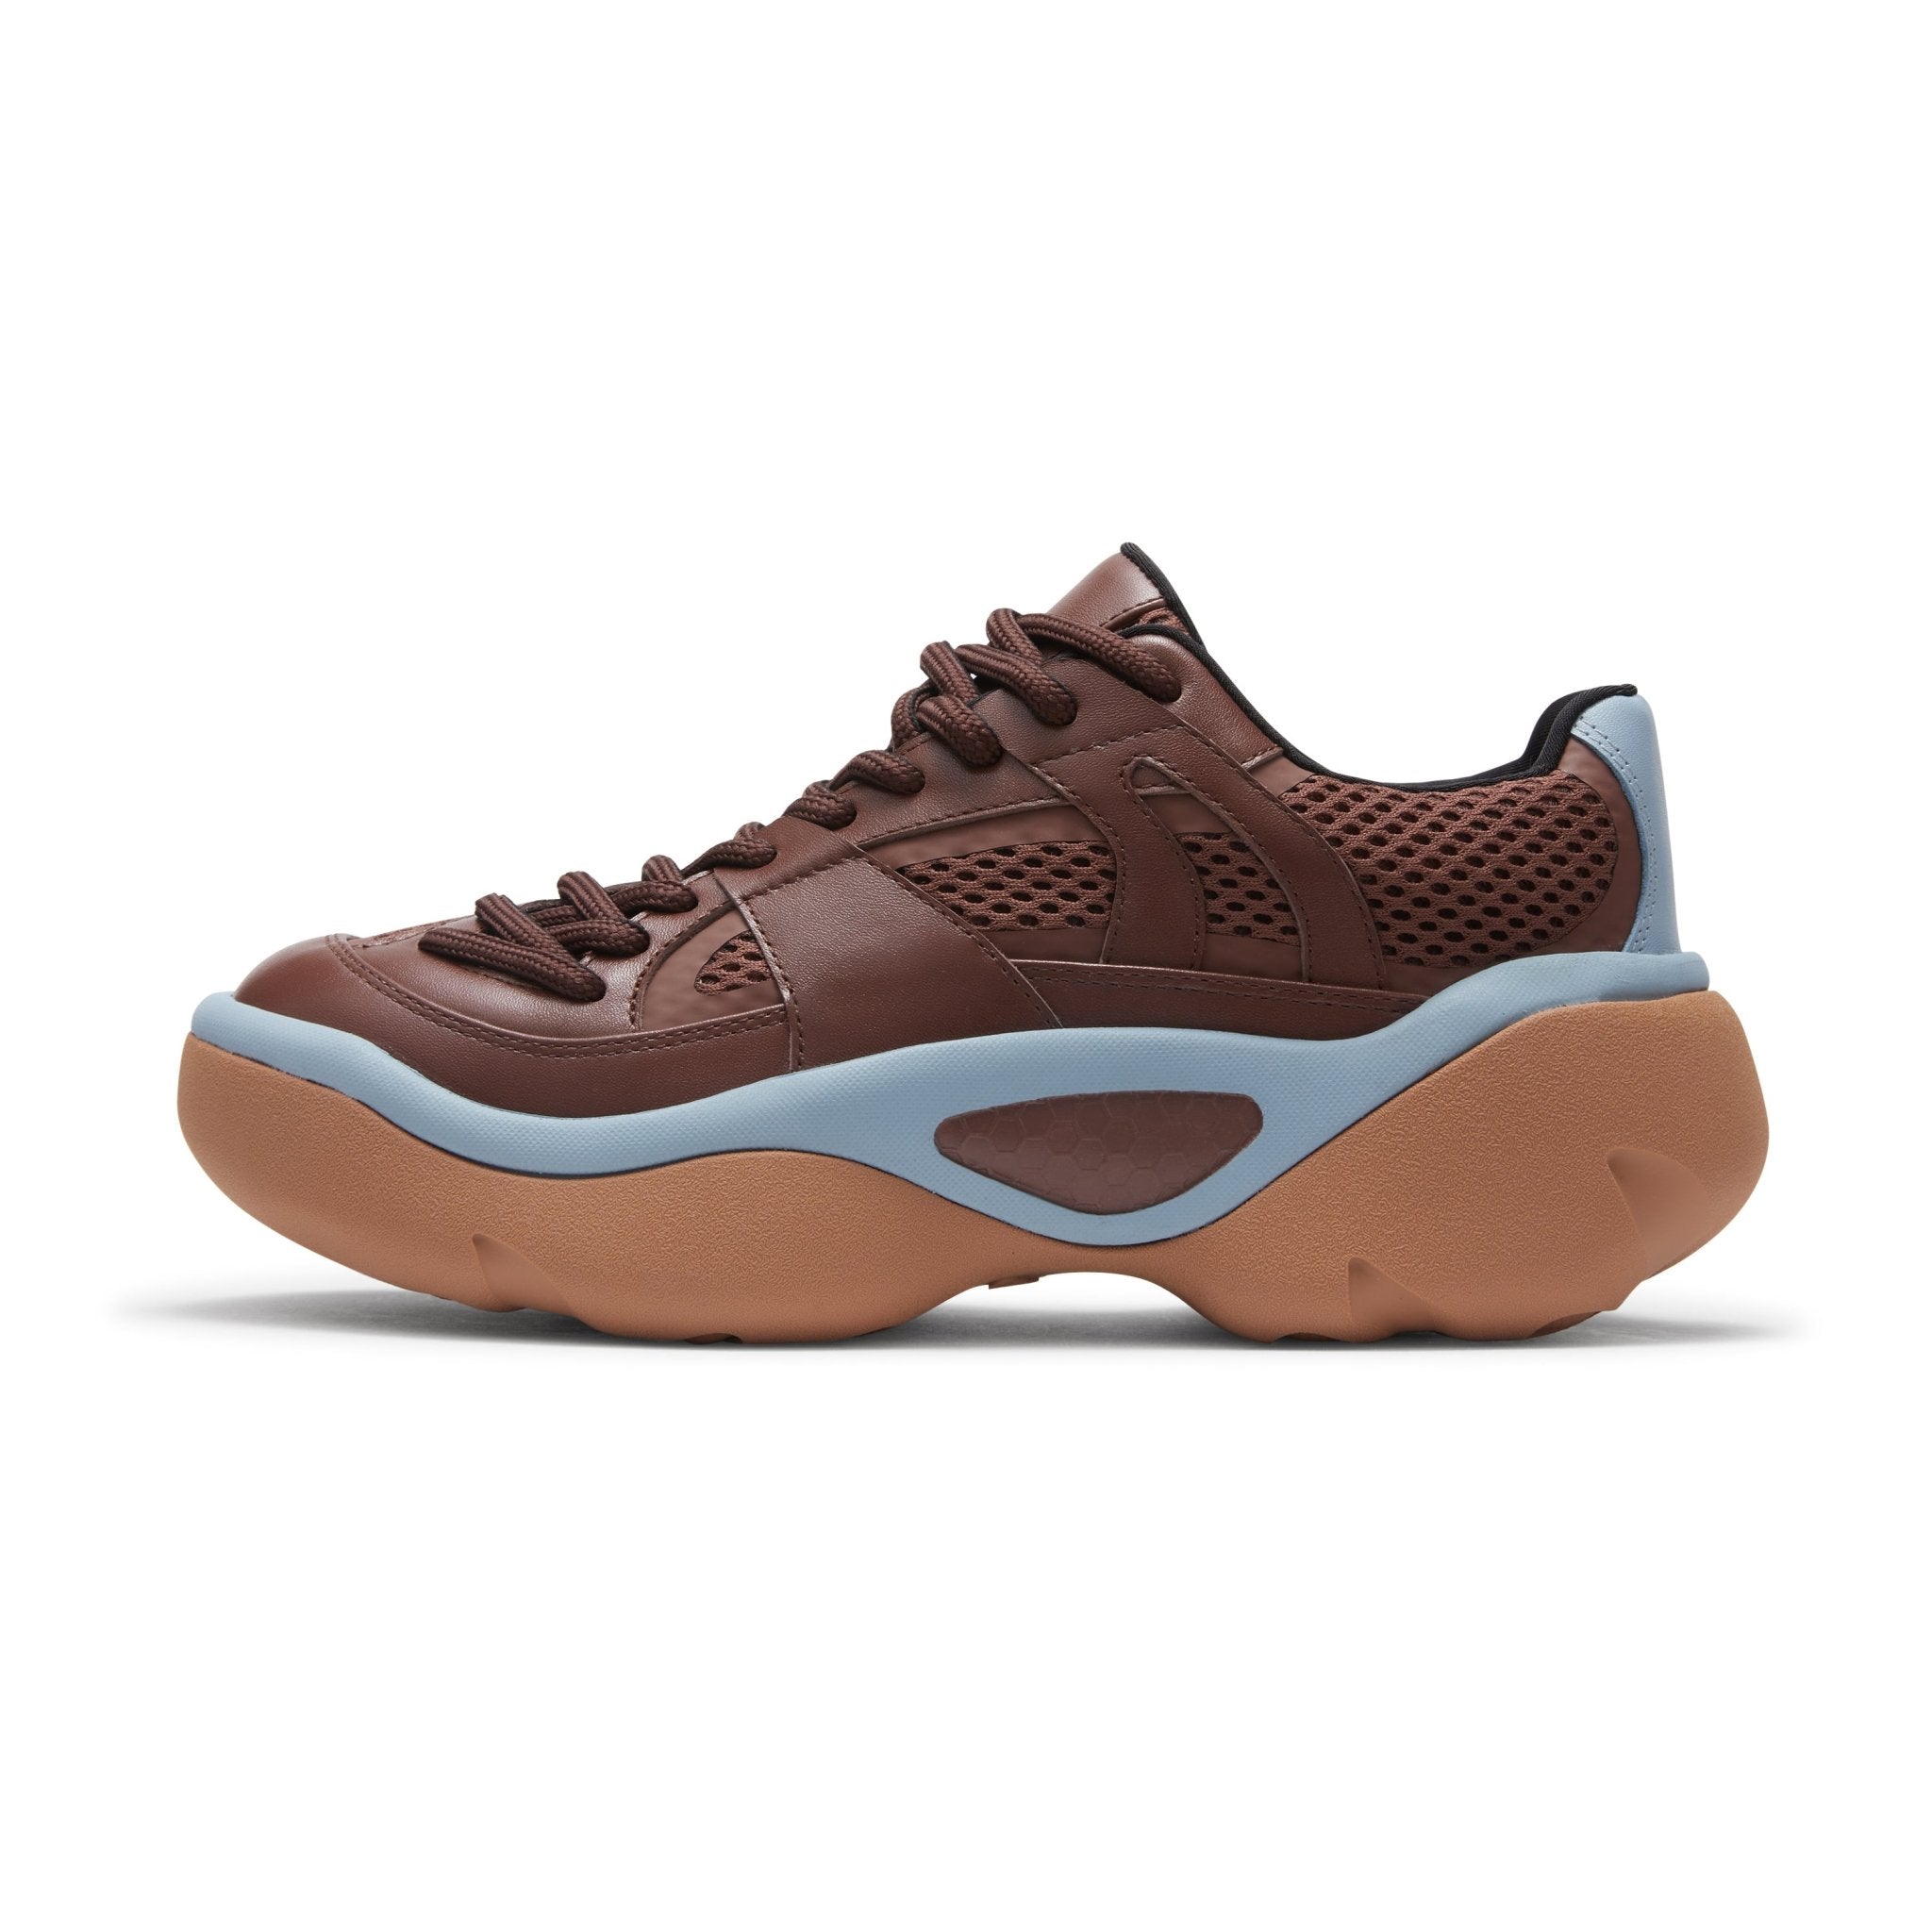 LOST IN ECHO Thick Sole Stitching Sneakers in Dark Brown | MADA IN CHINA